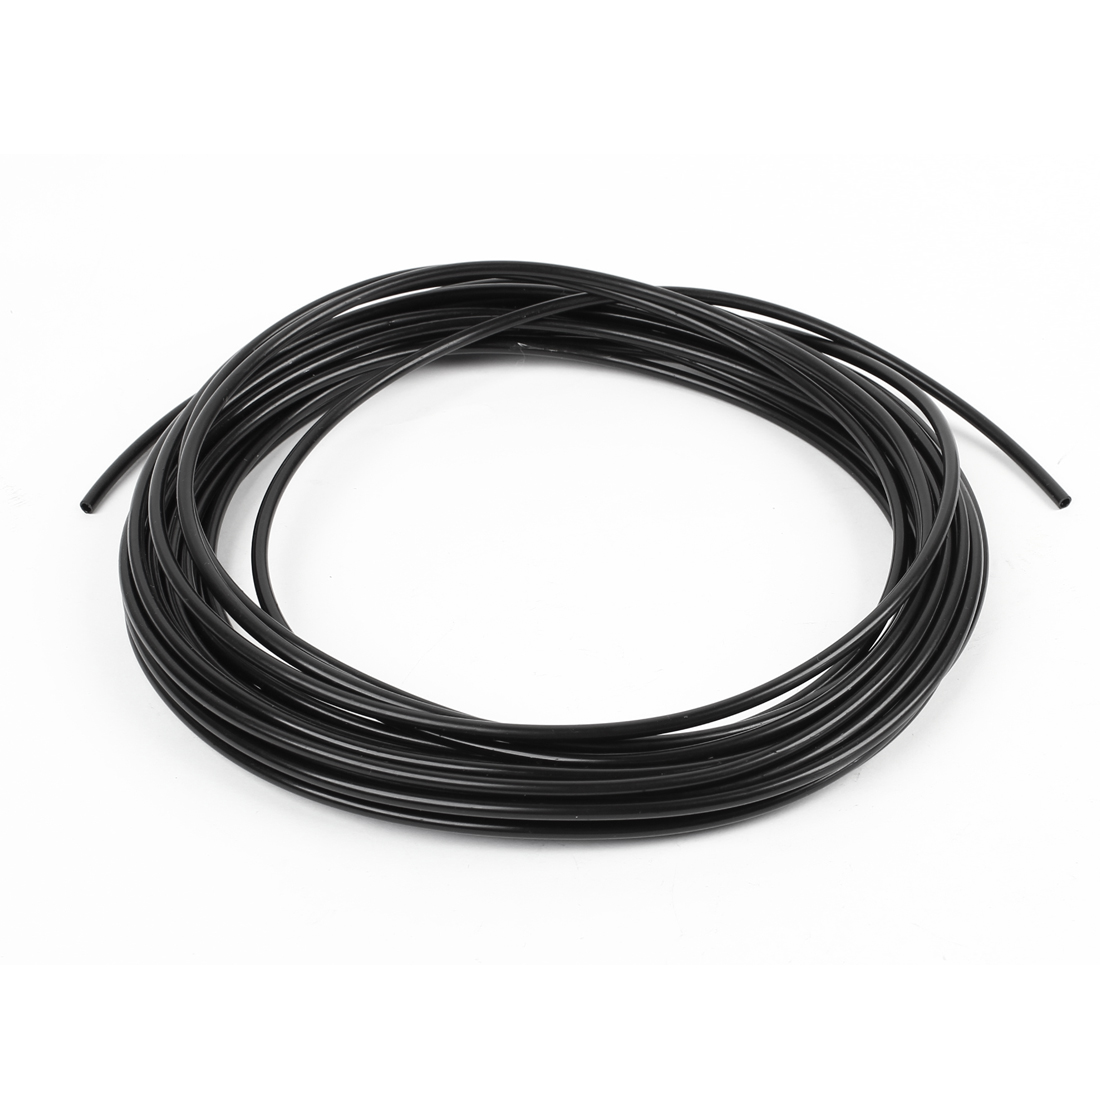 Unique Bargains Black 10 Meters 4mm OD 2.5mm ID 0.75mm Wall Thickness PU Air Hose Pipe